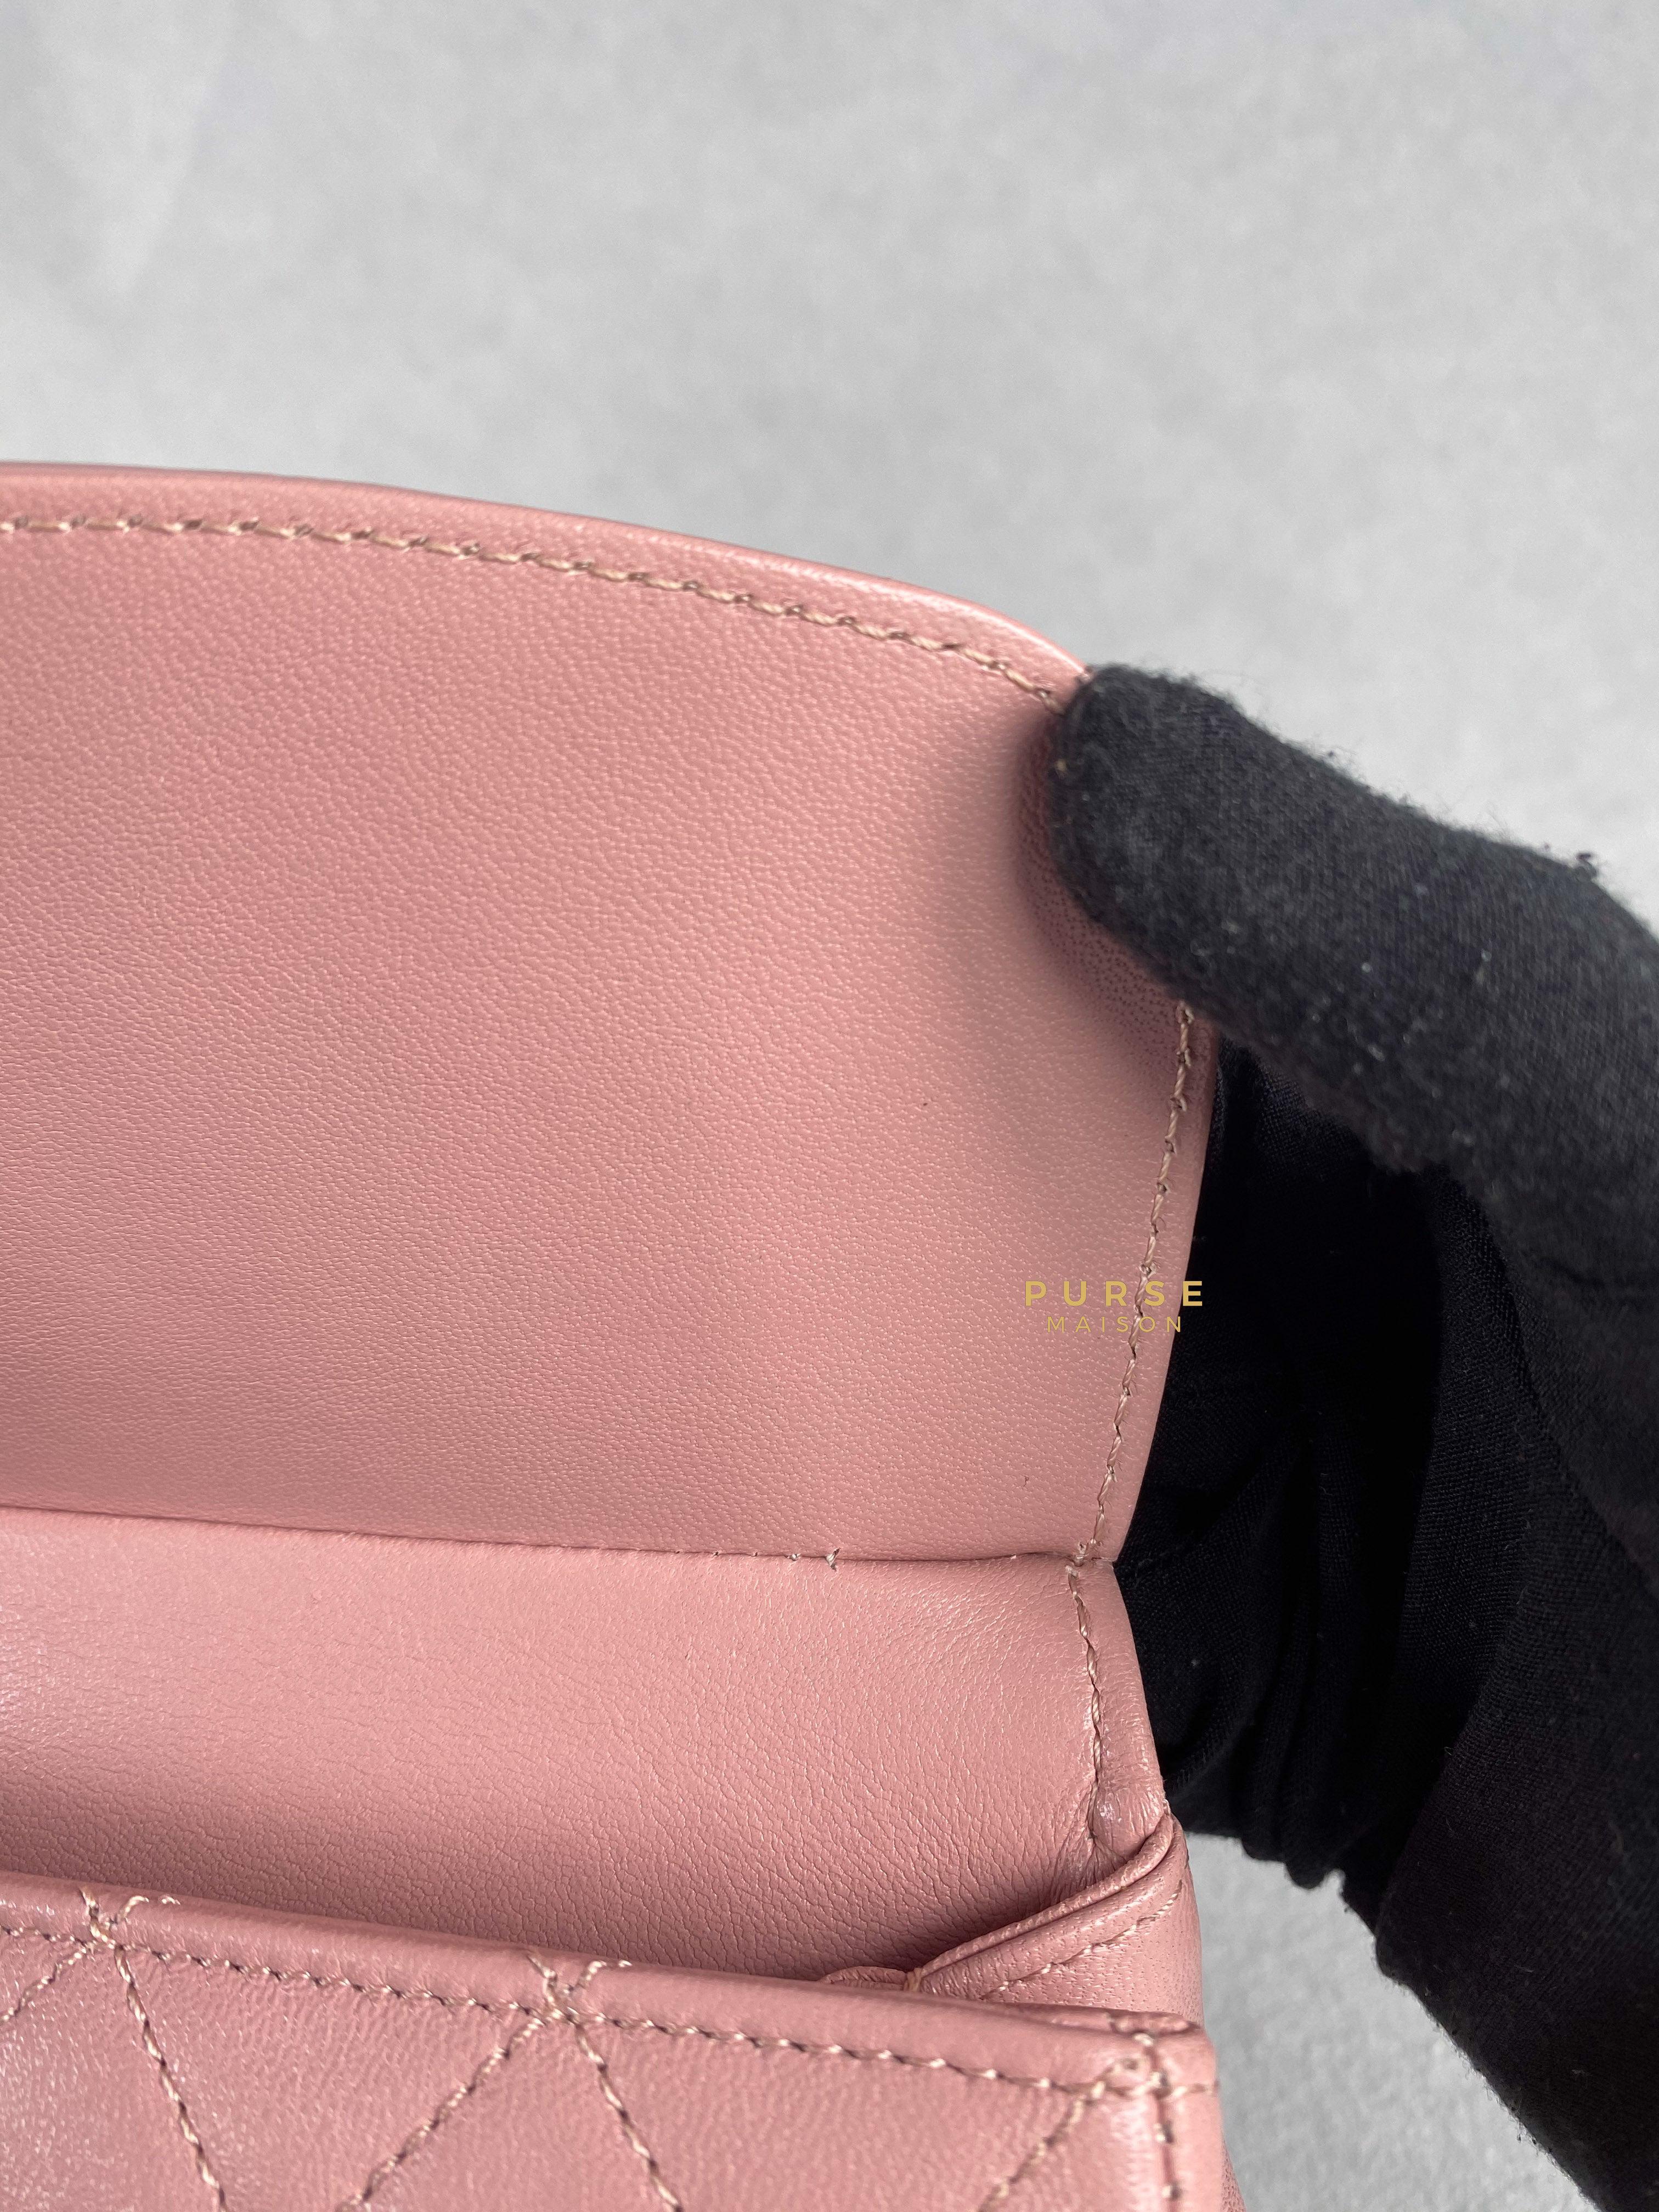 Chanel Curved Flap Bag in Baby Pink Calfskin and Aged Gold Hardware Series 27 | Purse Maison Luxury Bags Shop